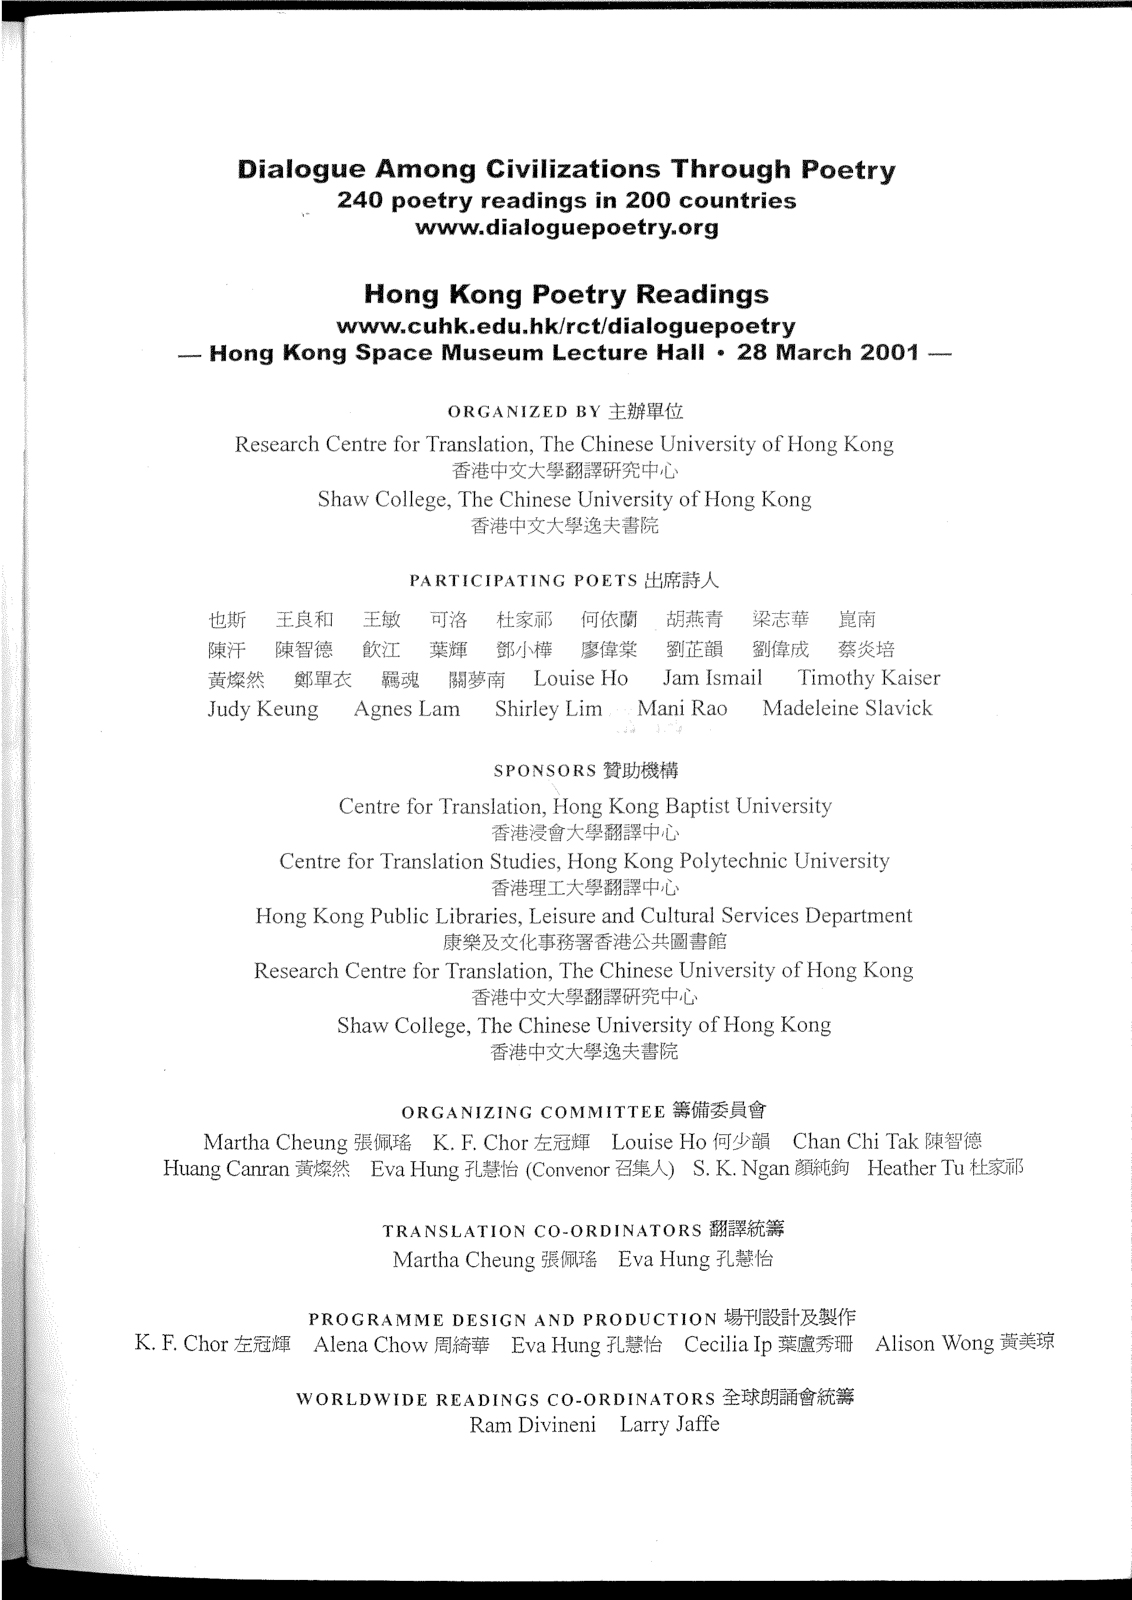 Dialogue Among Civilizations Through Poetry (240 poetry readings in 200 countries): Hong Kong Poetry Readings - Readings in 150 Cities around the World